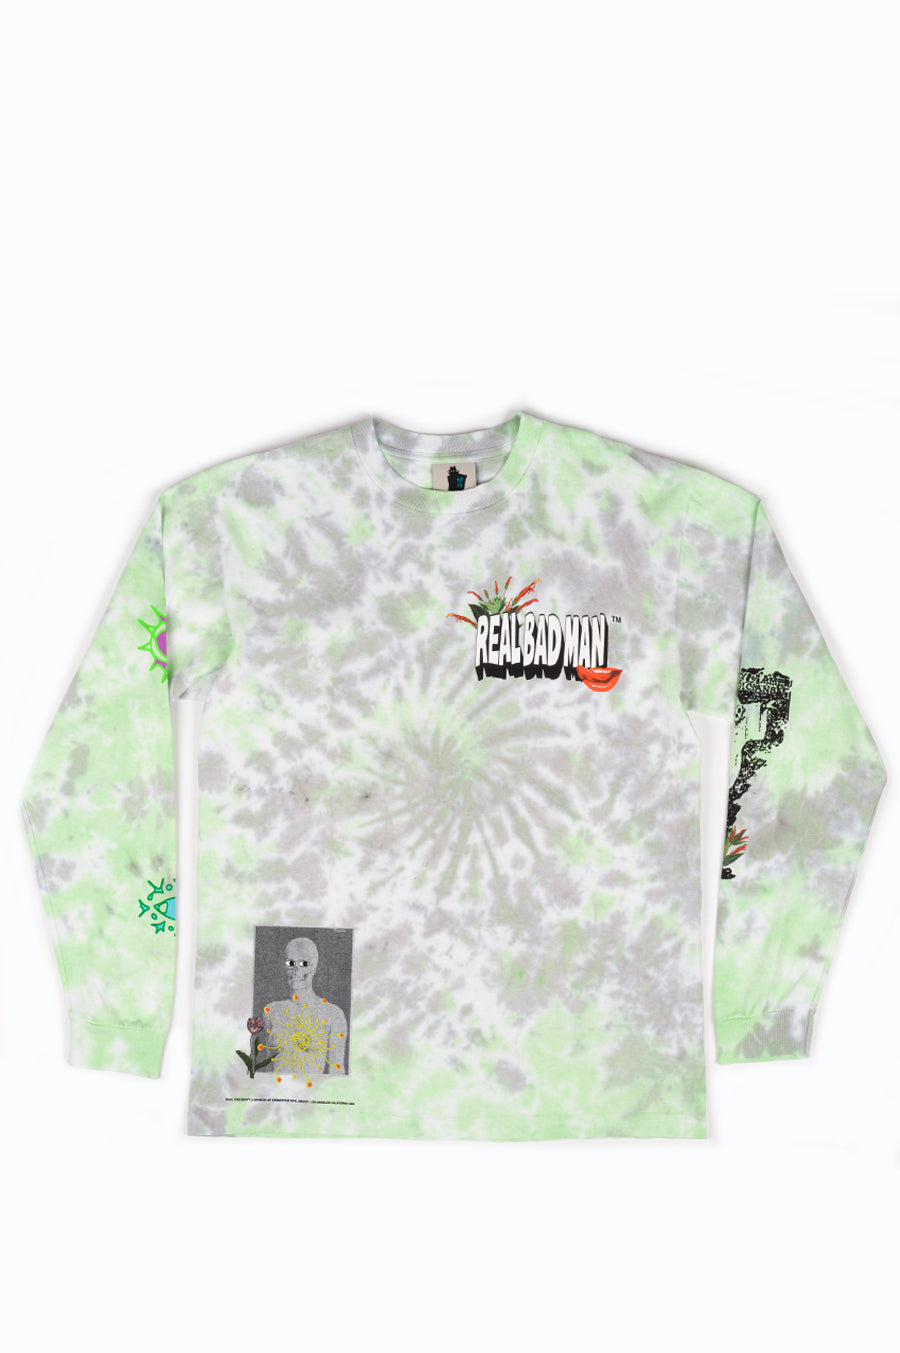 REAL BAD MAN FROM OUTER SPACE LS TEE TIE DYE